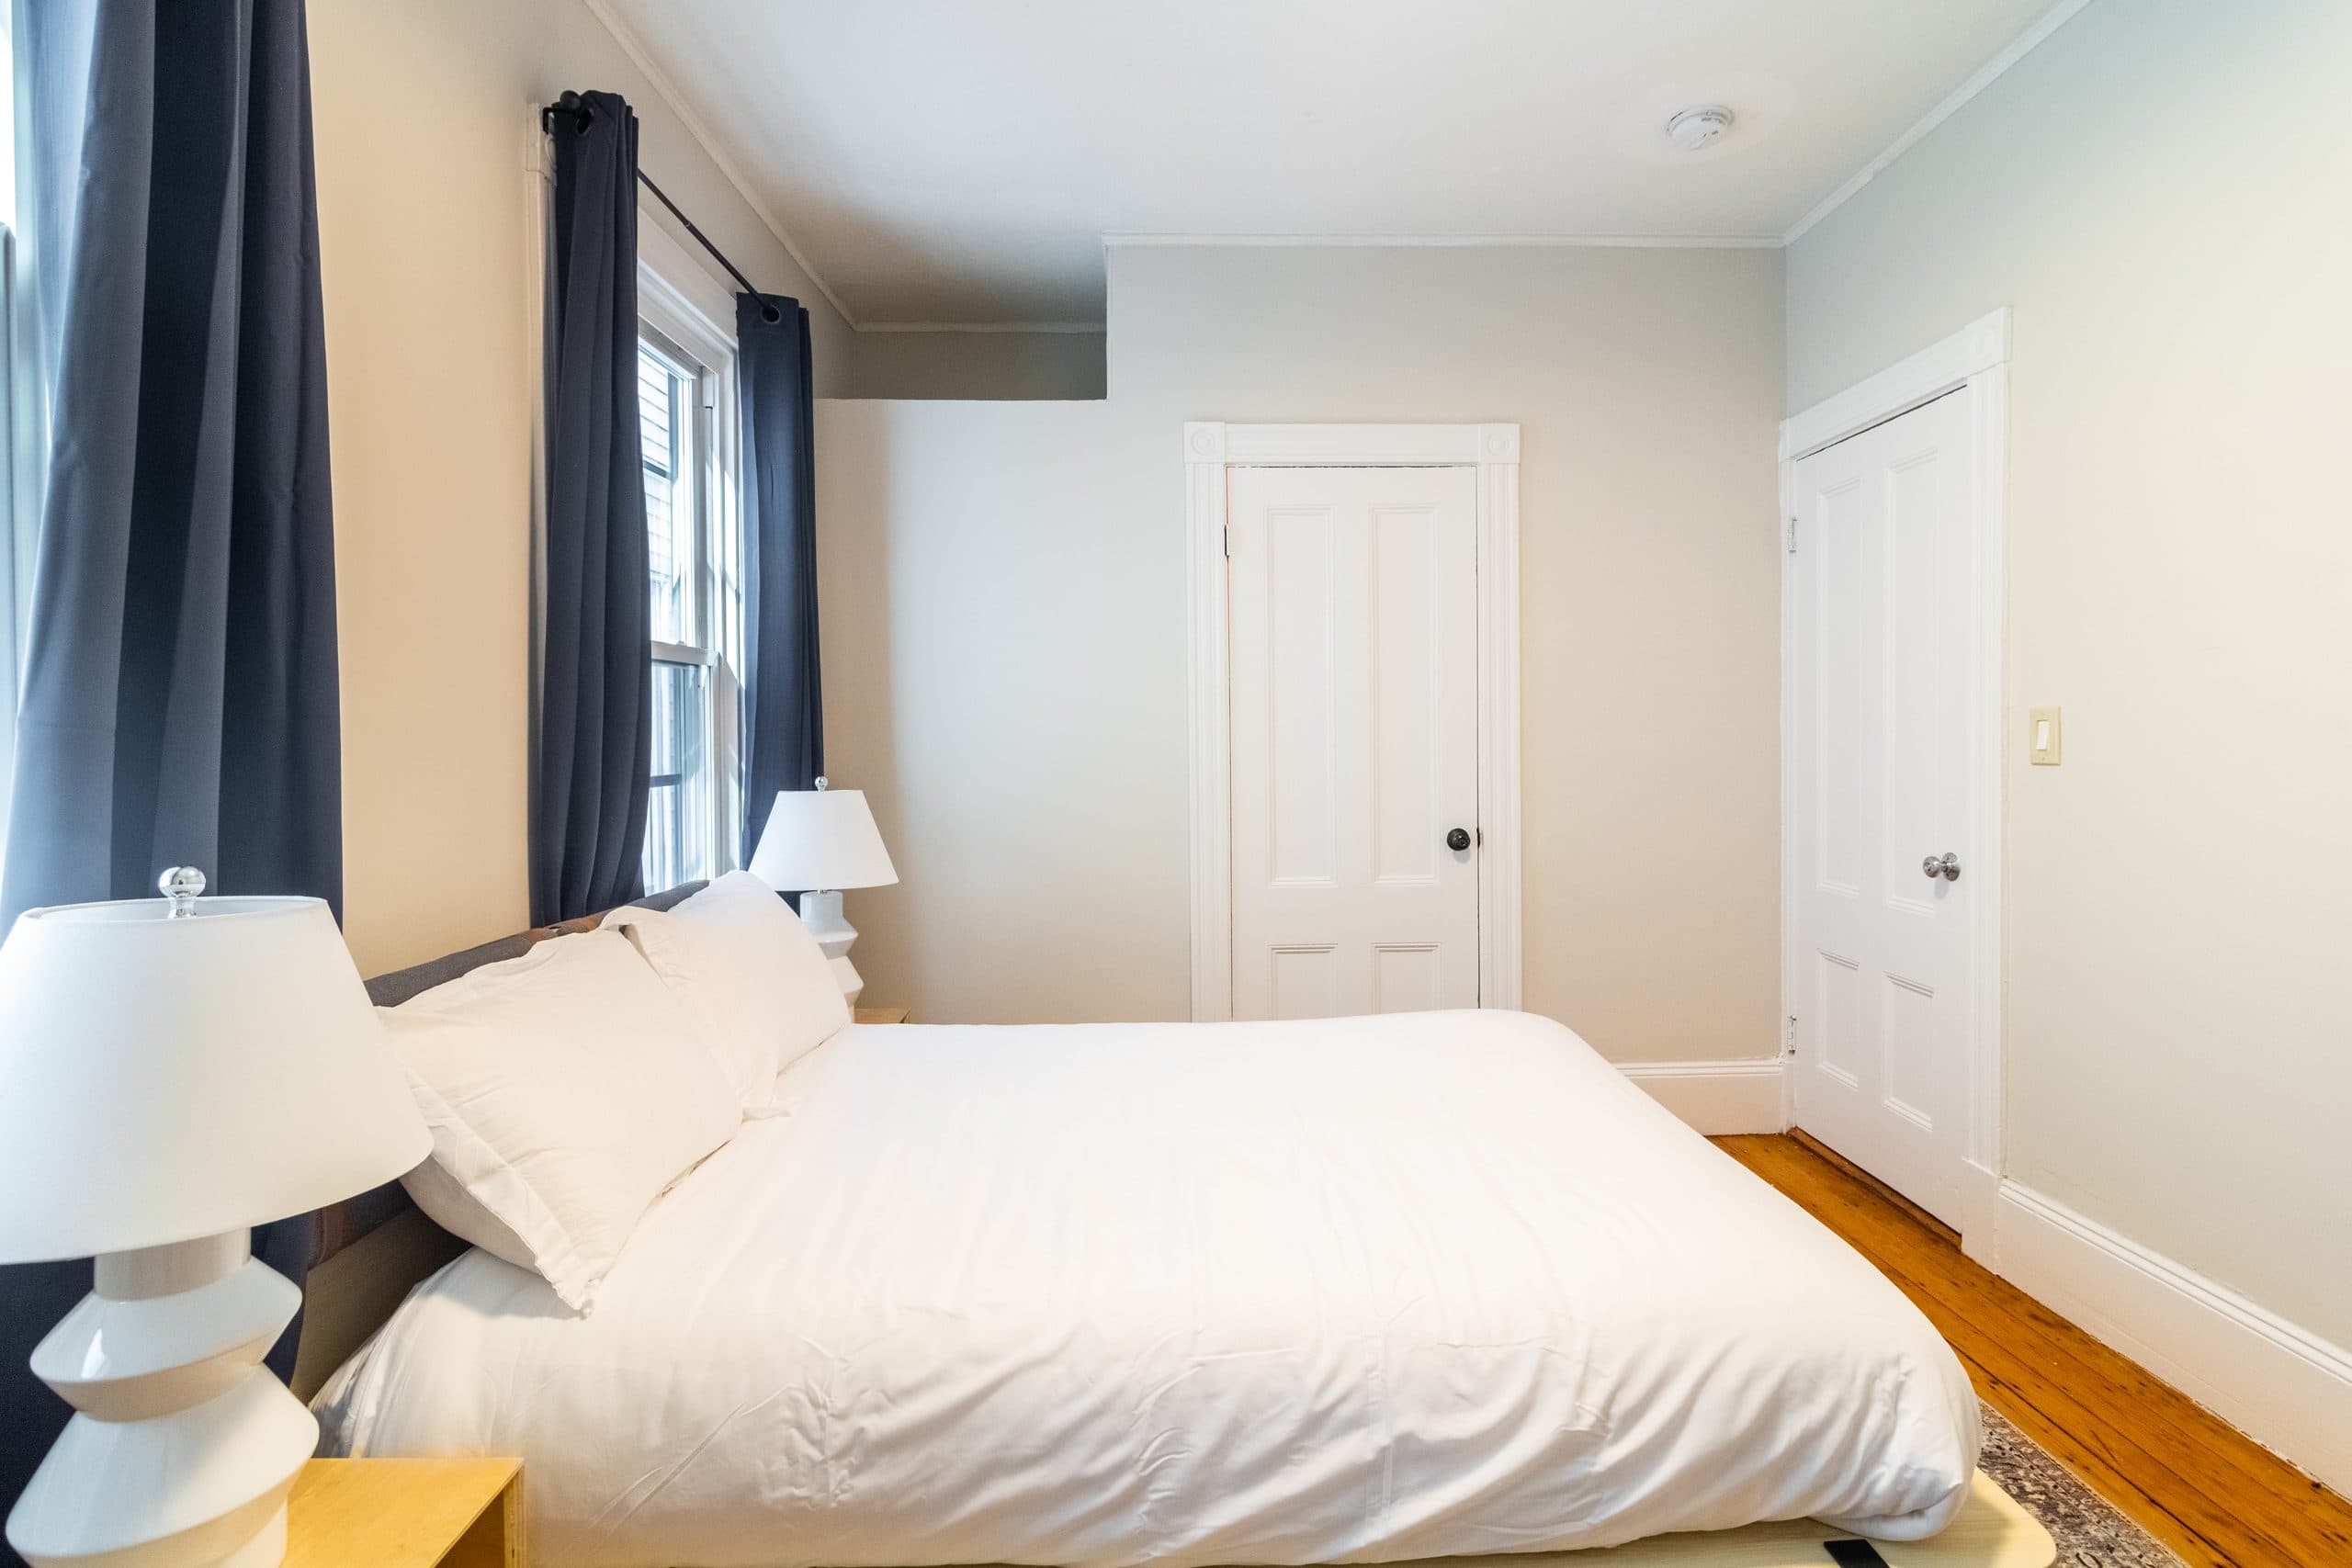 Photo 12 of #2593: Queen Bedroom A at June Homes